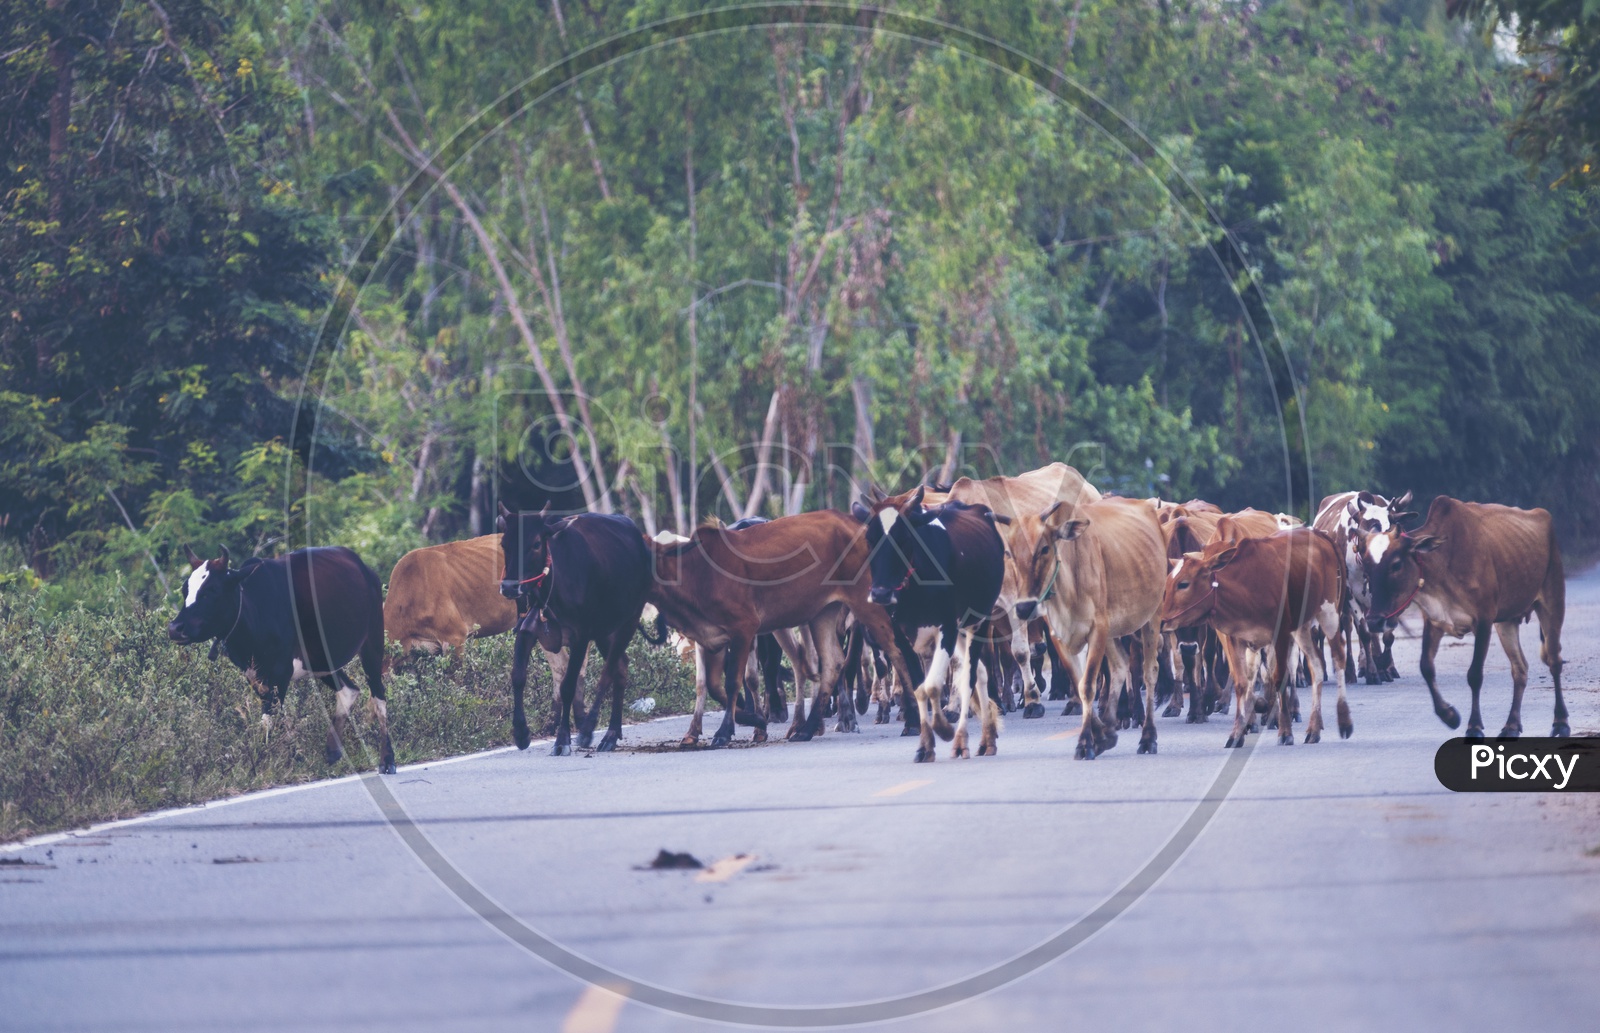 Stray cattle on the road